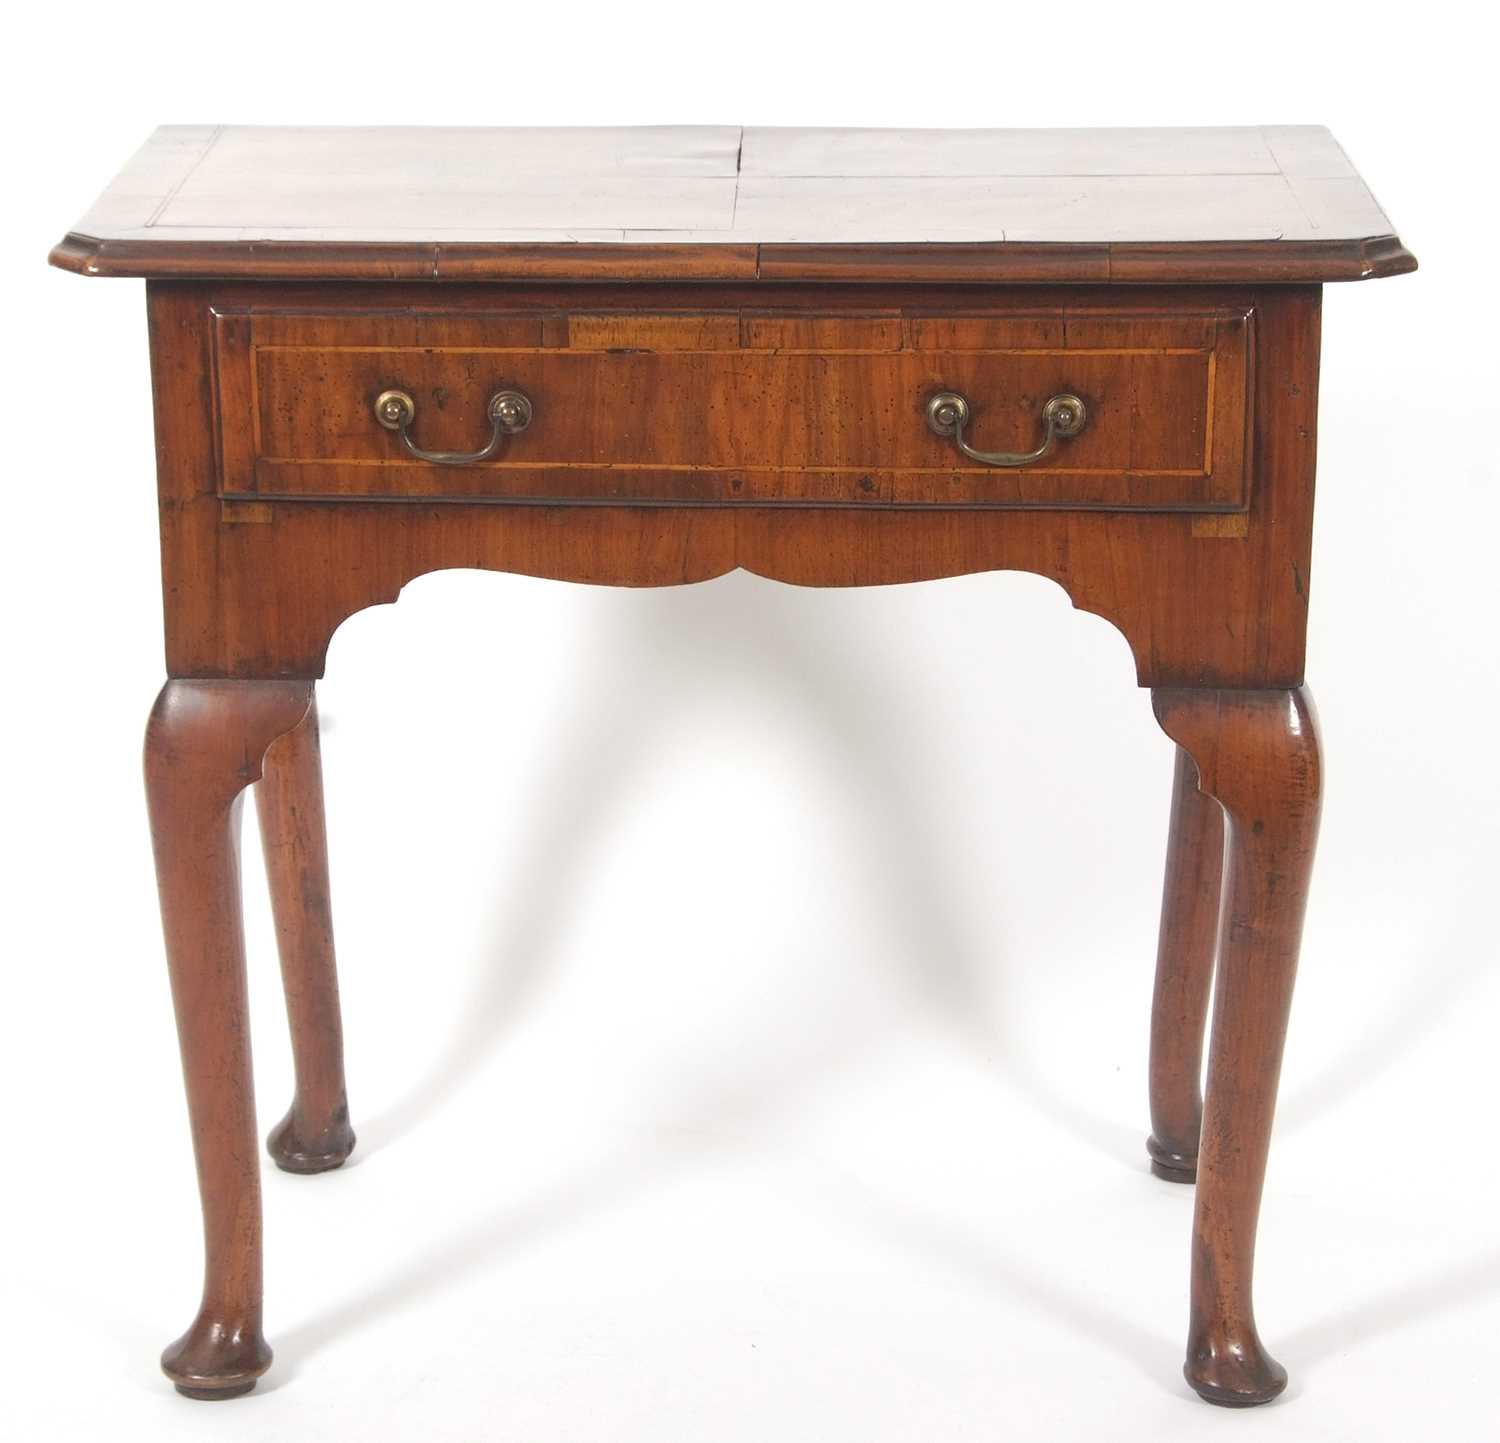 An early 18th Century walnut low boy, the top with quartered veneers and canted front corners over a - Image 2 of 10